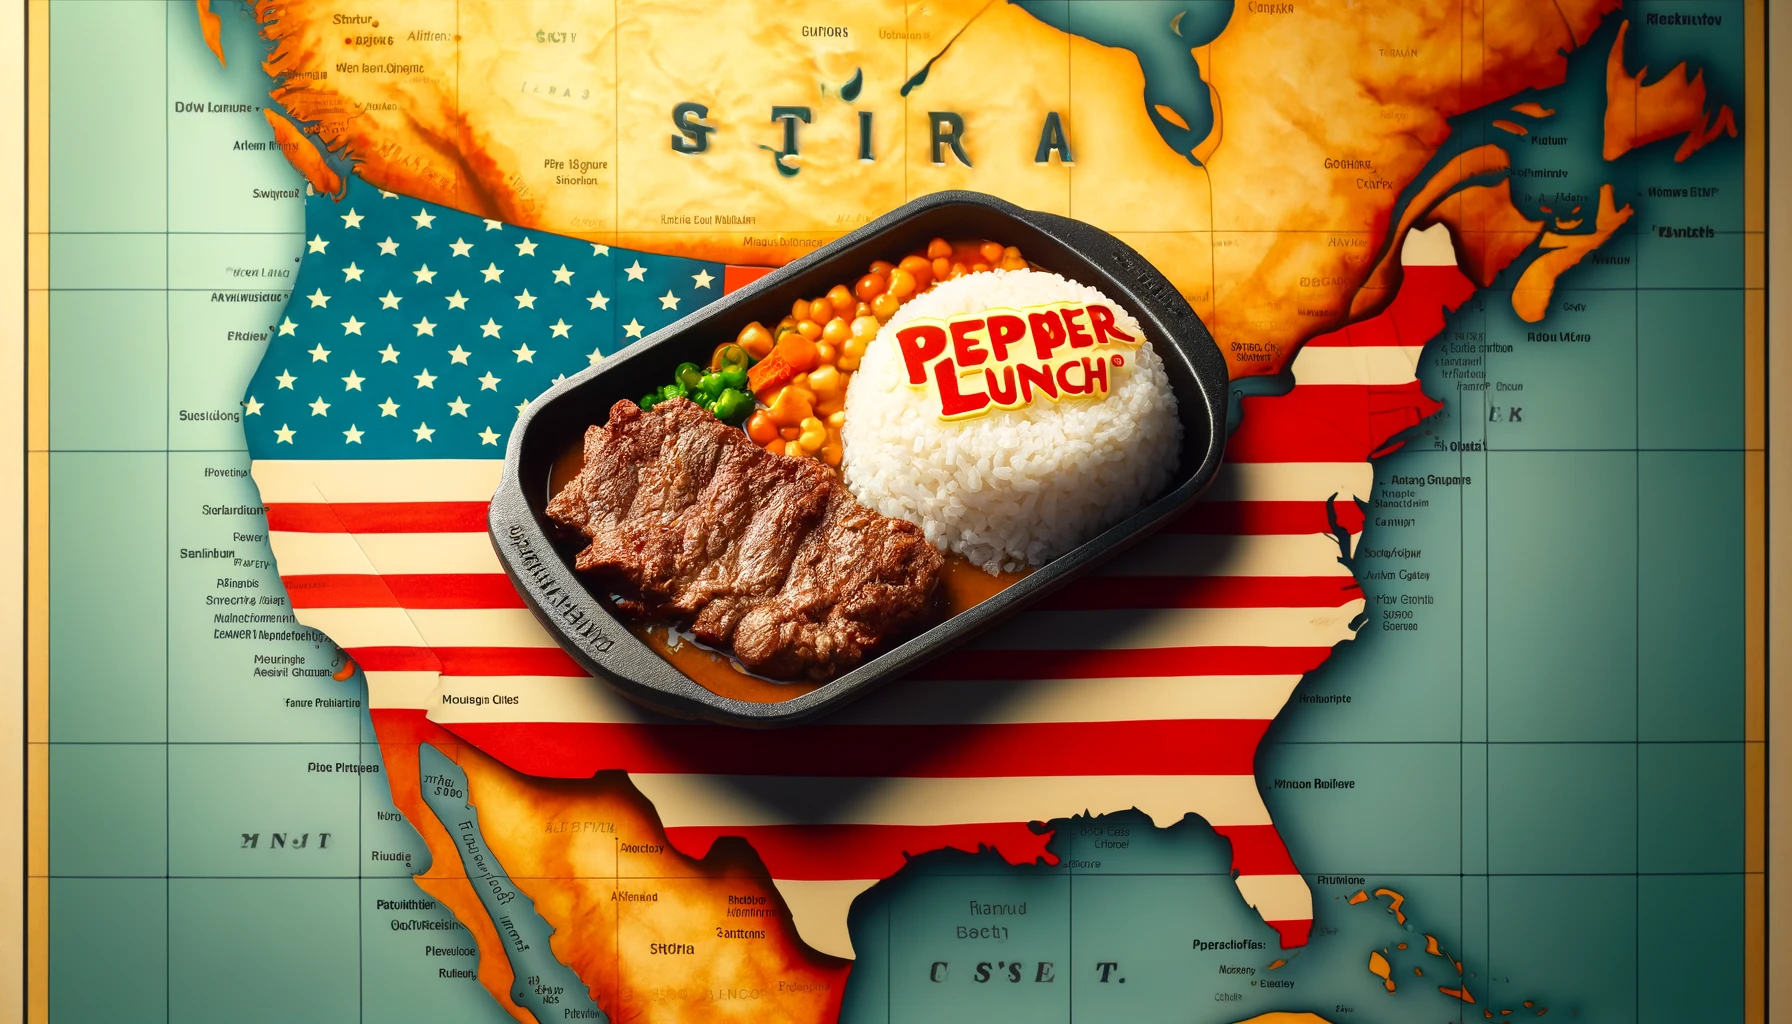 Is Pepper Lunch Available in the USA?